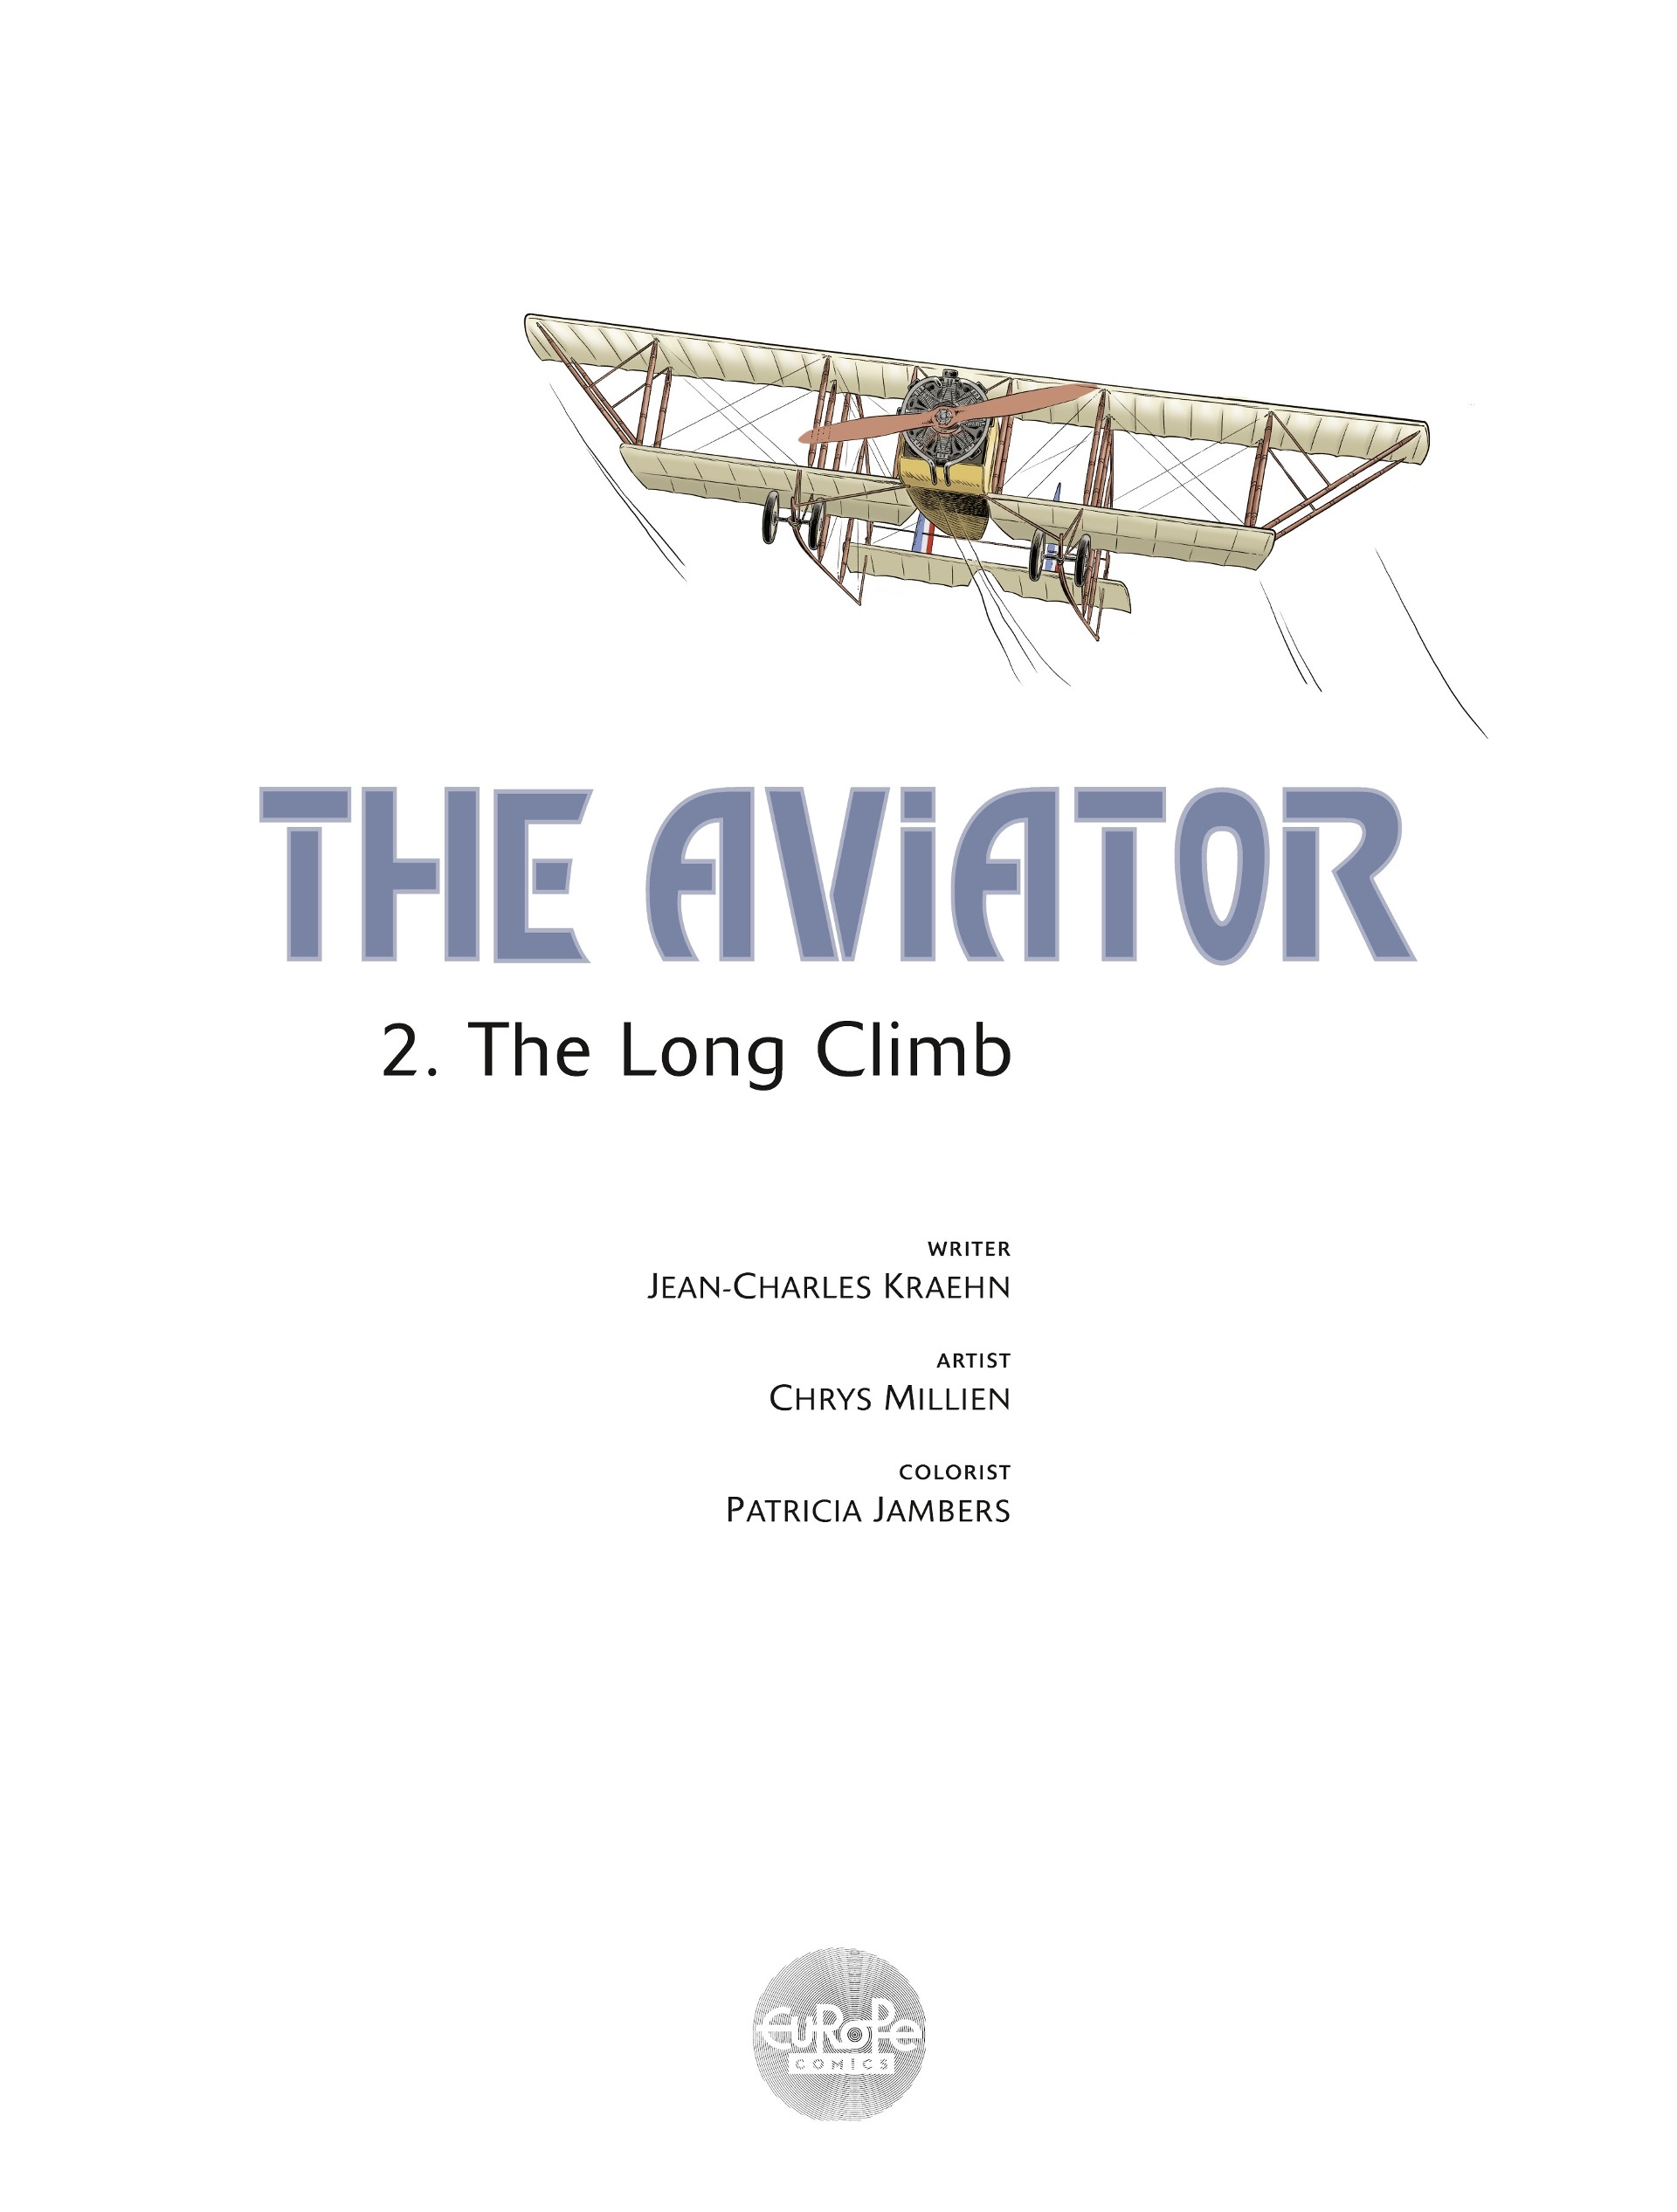 Read online The Aviator comic -  Issue #2 - 2